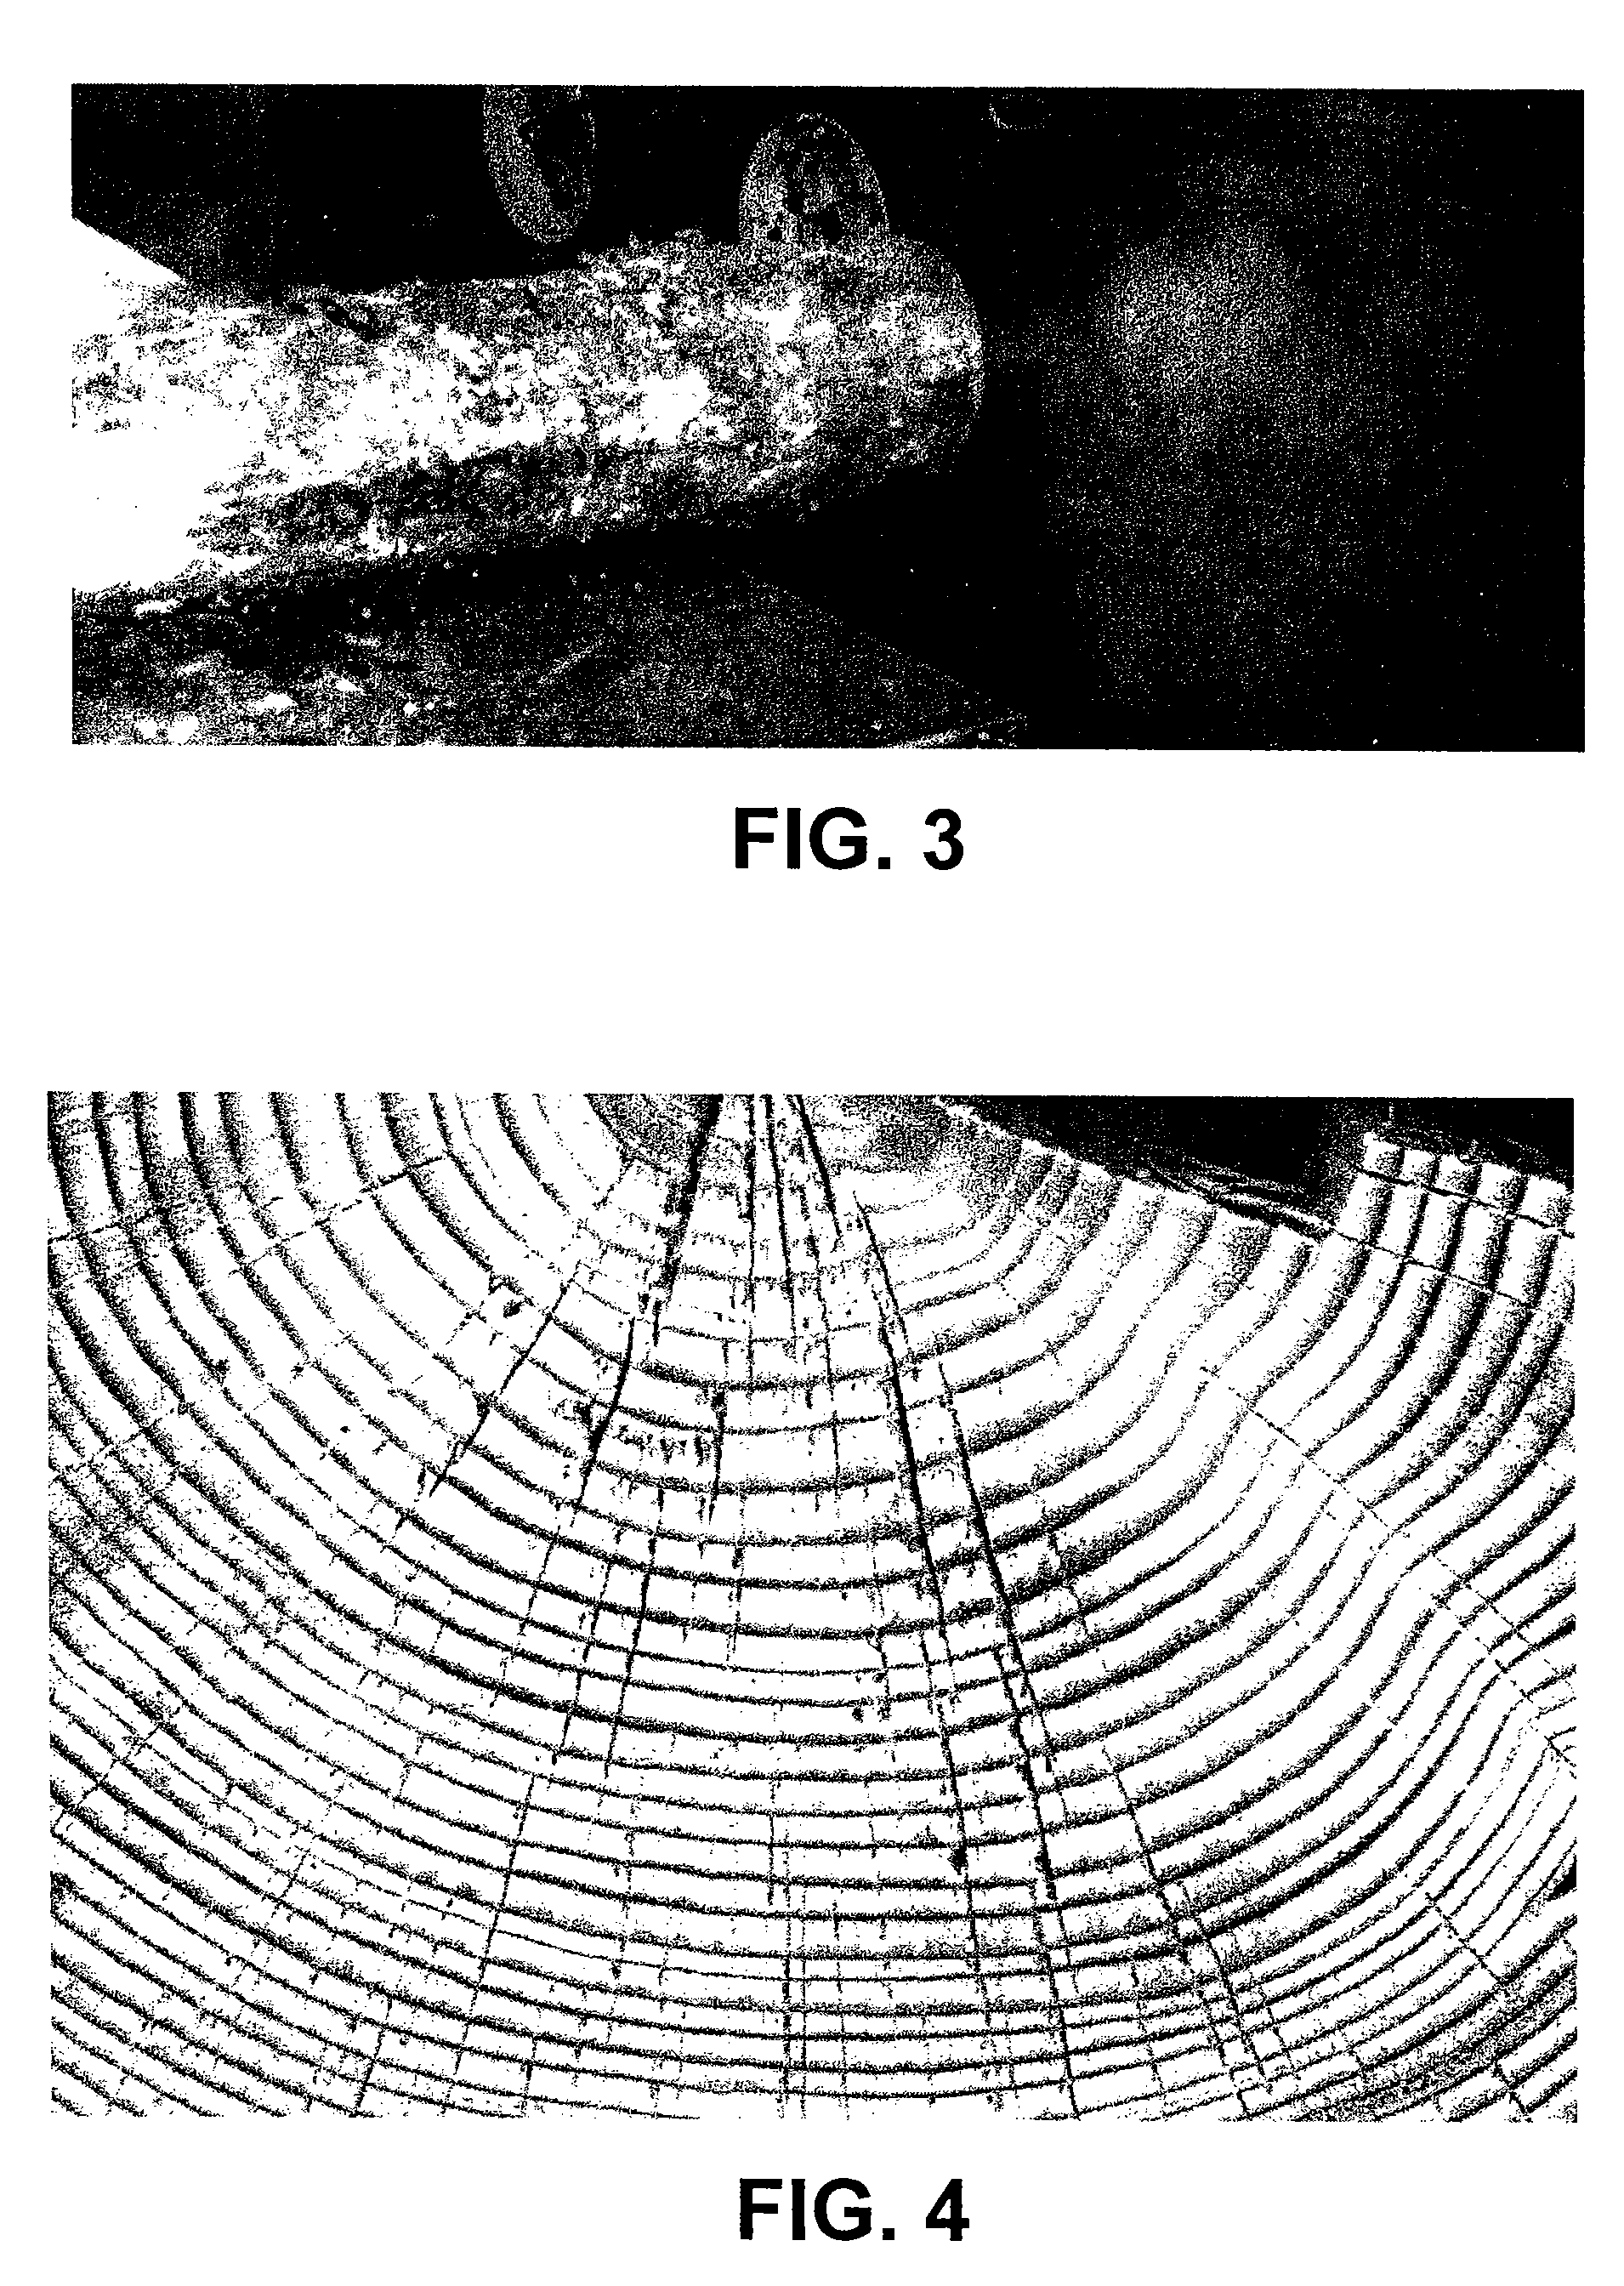 Microwave pretreatment of logs for use in making paper and other wood products